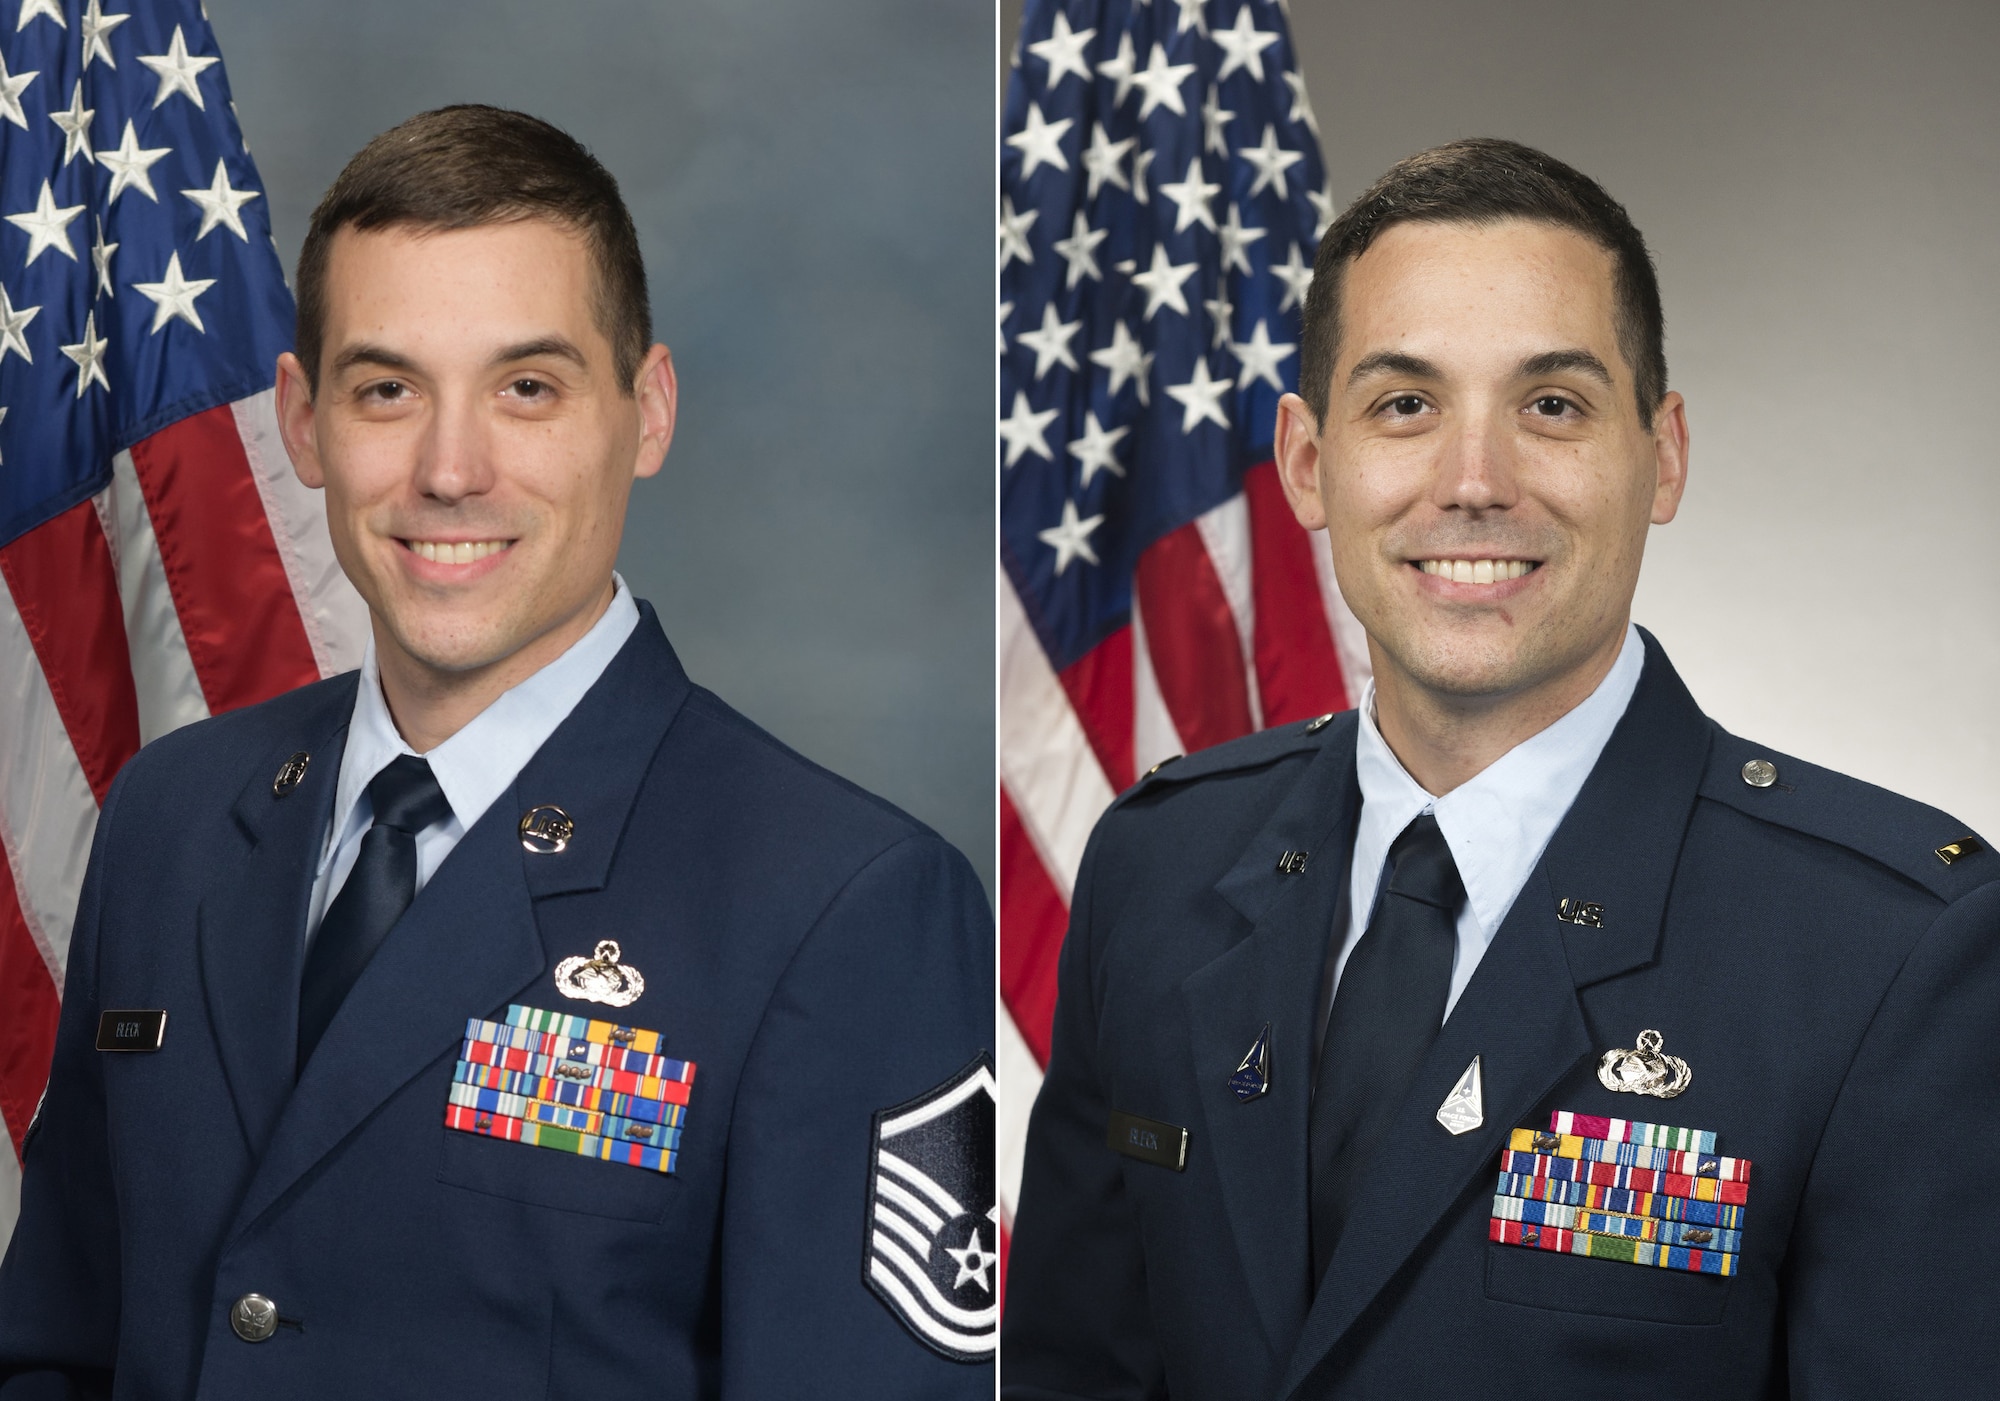 Prior U.S. Air Force Master Sgt. Bryan Bleck, left, now U.S. Space Force 2nd Lieutenant, right, was selected to commission into the Space Force through the Senior Leader Enlisted Commissioning Program. SLECP allows designated Air Force and Space Force senior leaders to directly select exceptionally performing, highly talented enlisted Airmen for commissioning through Officer Training School.